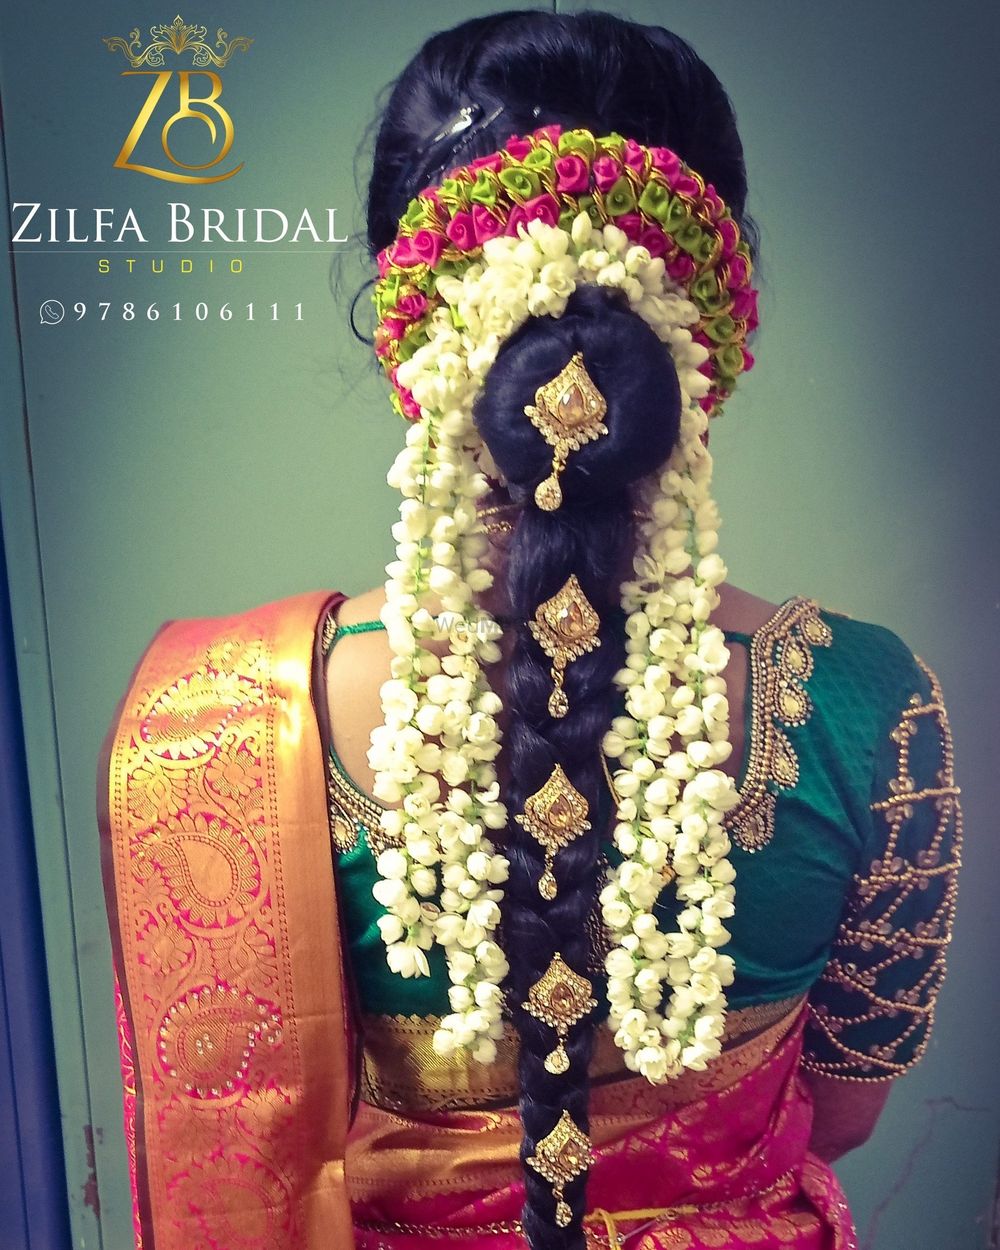 Photo From Hairstyle 's of Zilfa - By Zilfa Bridal Studio